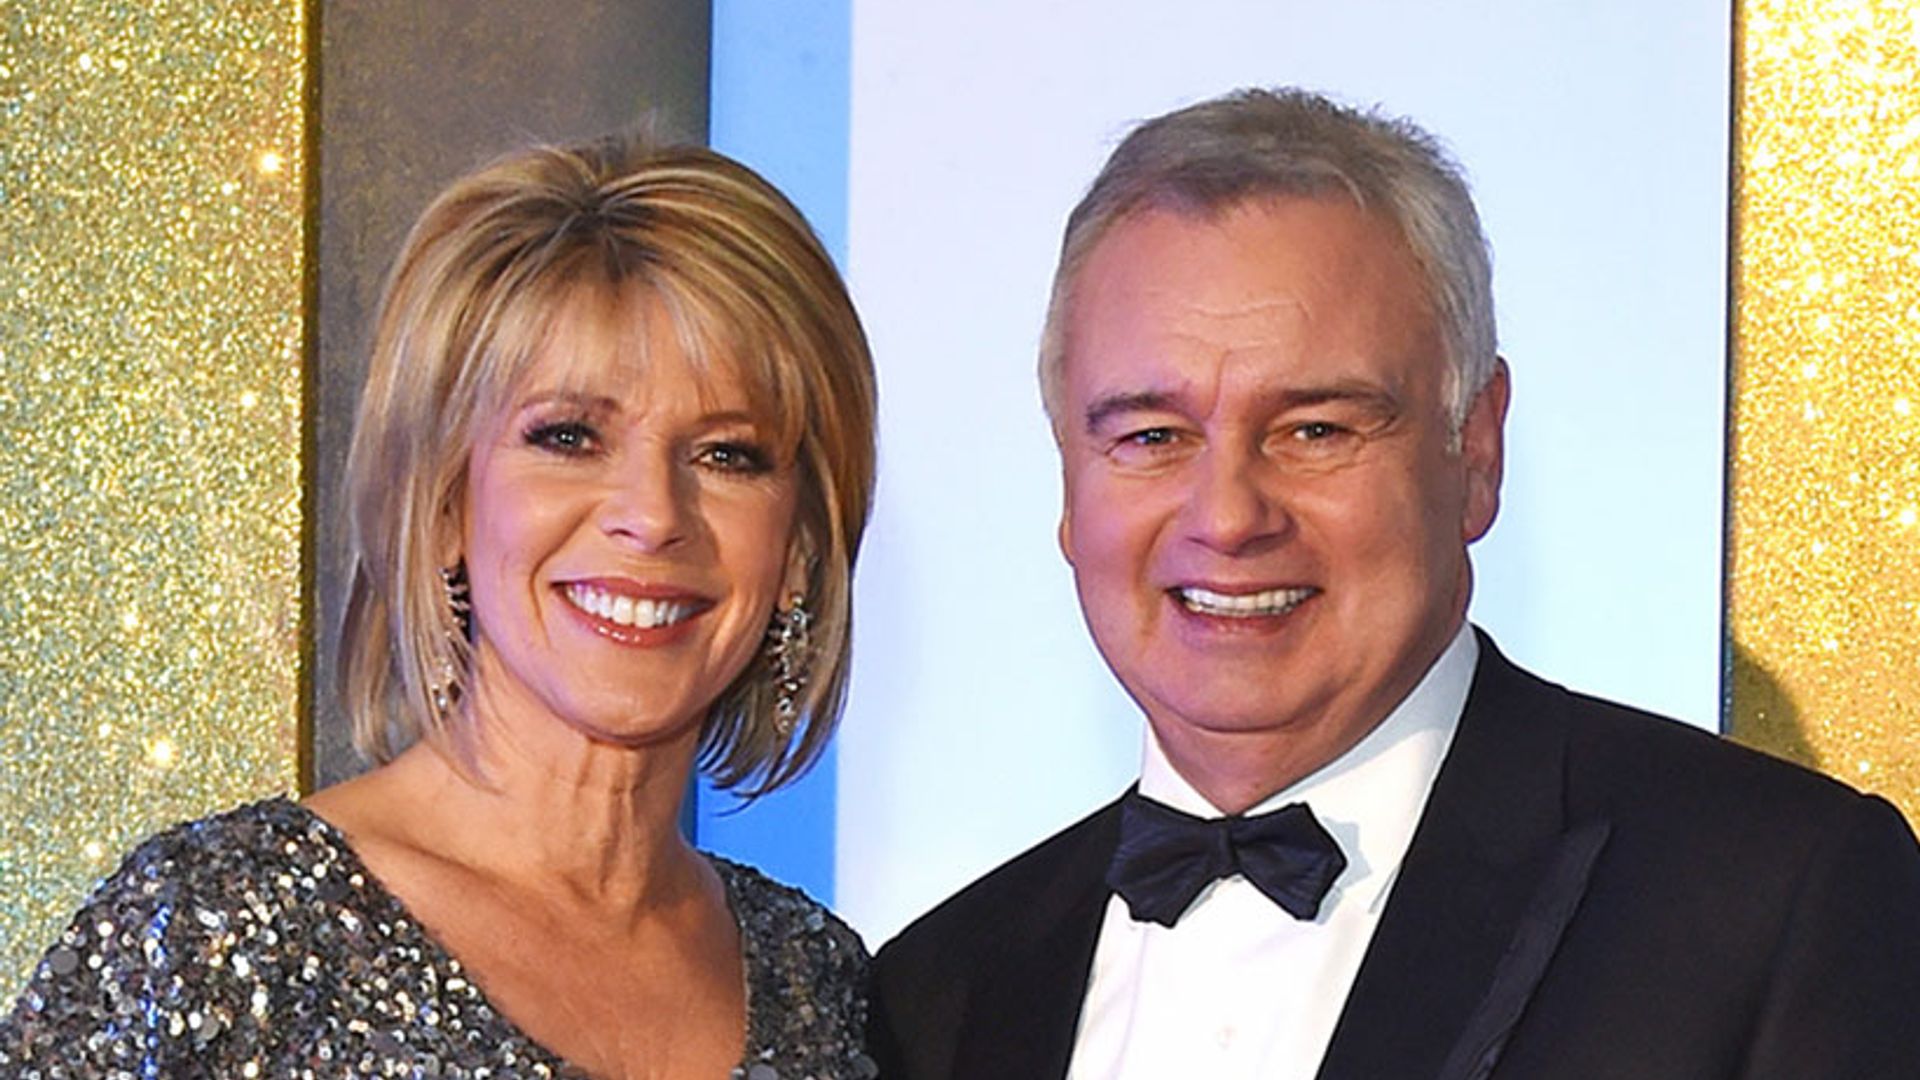 Eamonn Holmes reveals his nerves for Ruth Langsford after she was announced as the third Strictly contestant